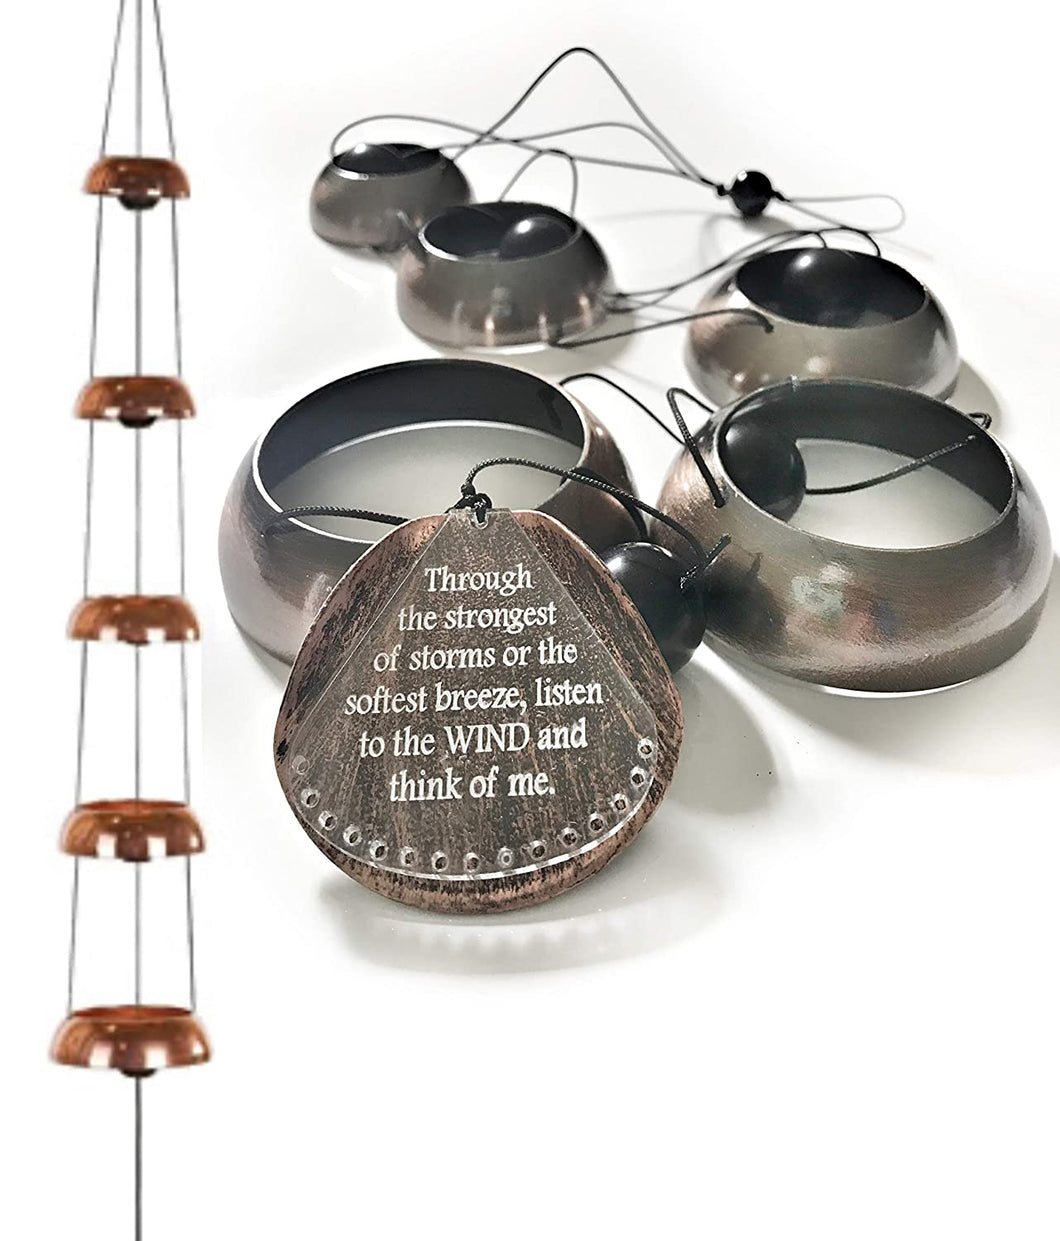 Graceful Grieving Bronze Memorial Wind Temple 5 Tiered Bells In Memory of A Loved One in Heaven Sympathy Gifts by Weathered Raindrop